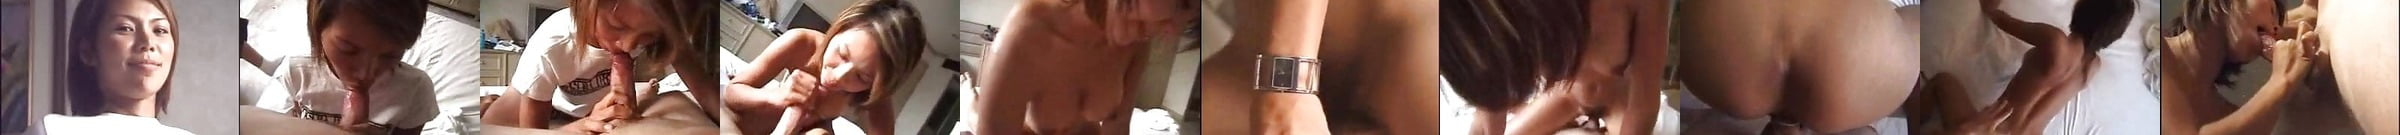 Fucking Horny Asian Cheating Wife In A Hotel Room Porn 58